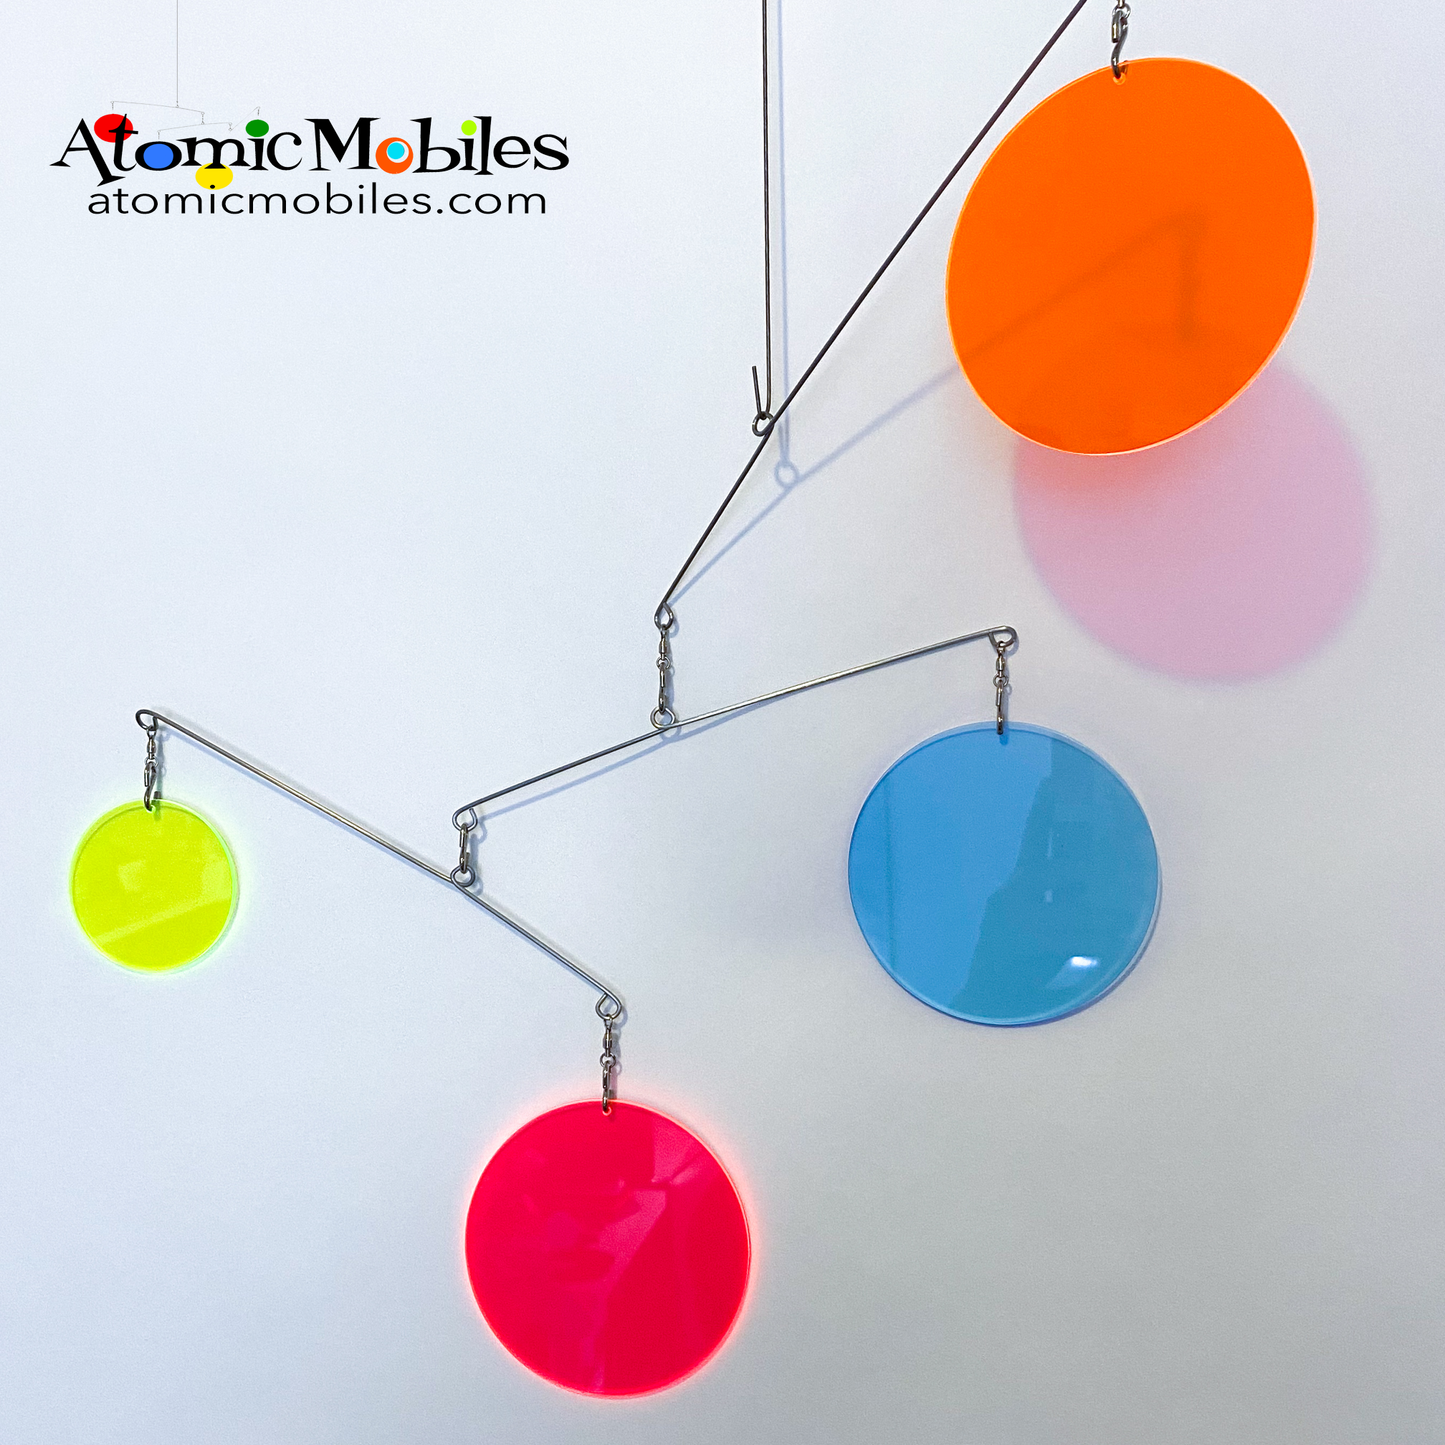 Neon Fluorescent Multi Color Hot Pink Lime Green Blue and Orange Atomic Mobile -  hanging modern kinetic art mobiles by AtomicMobiles.com